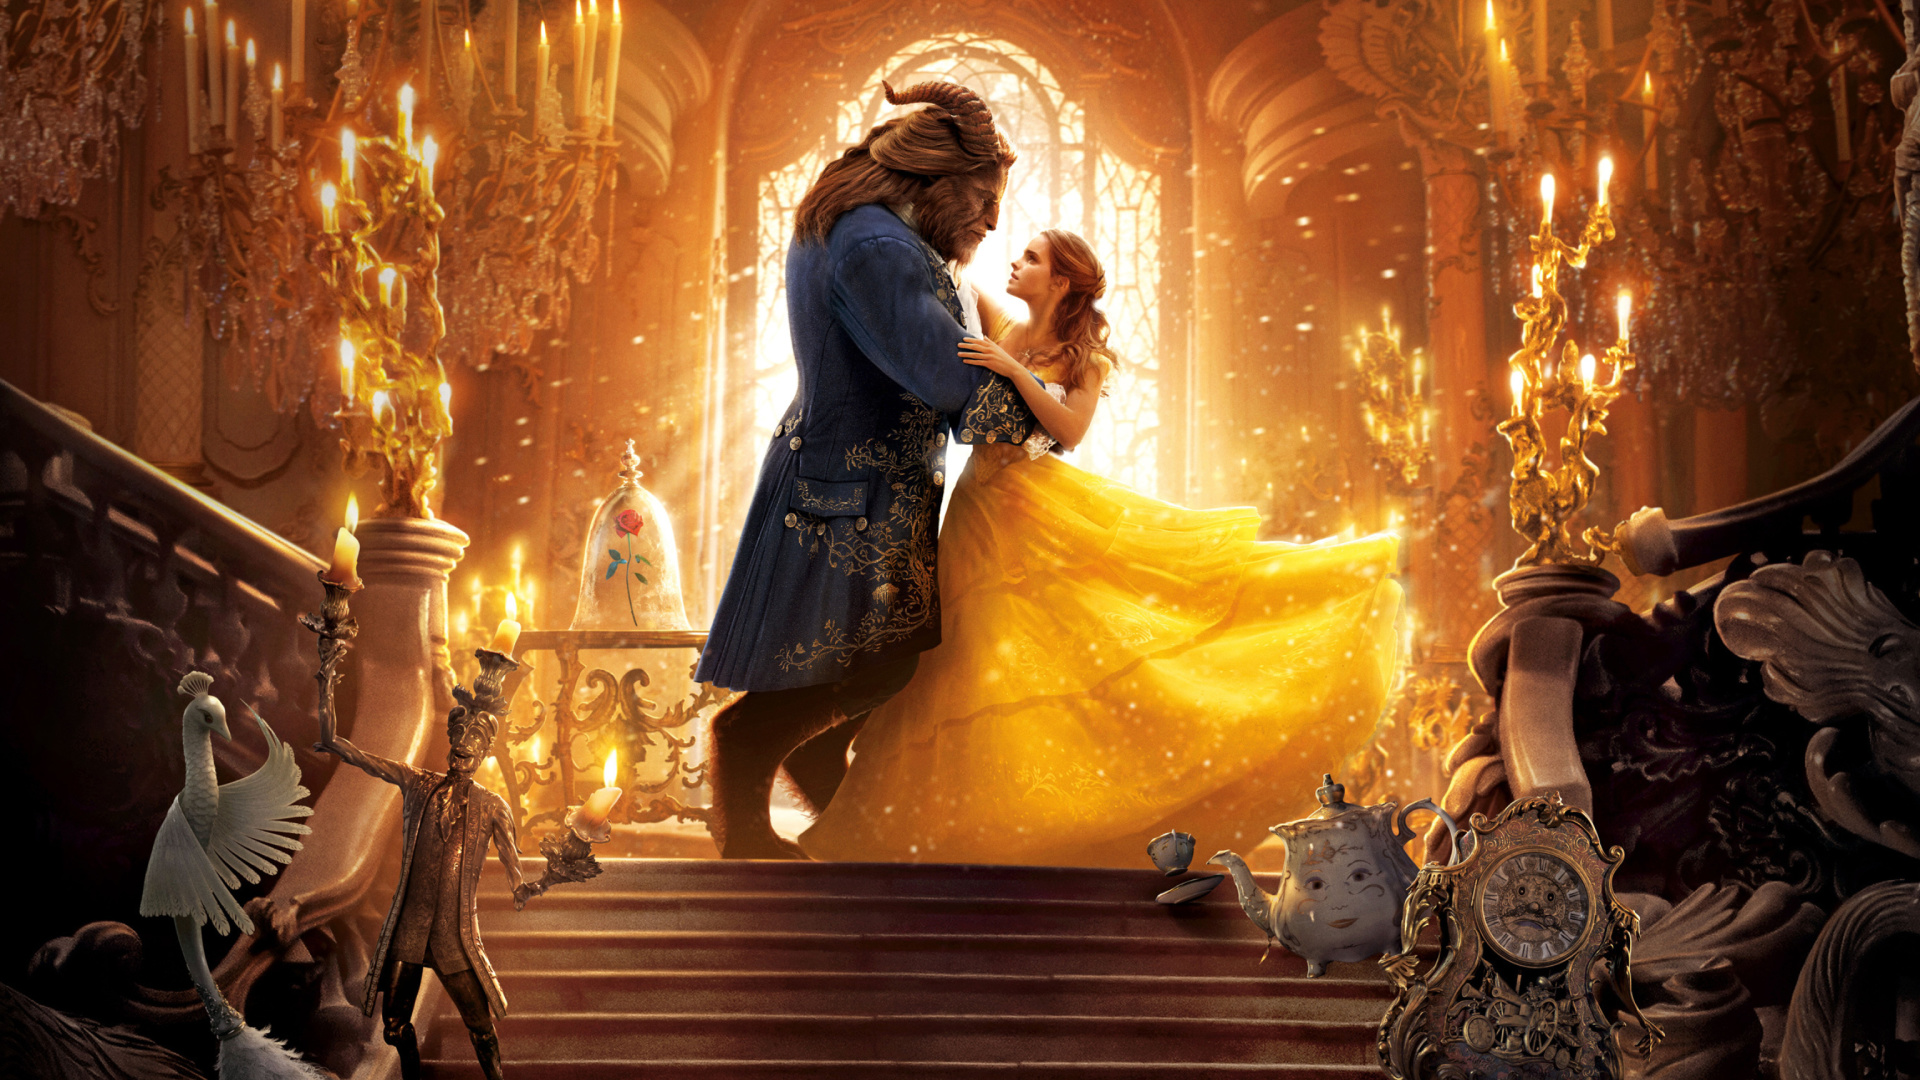 Das Beauty and the Beast HD Wallpaper 1920x1080